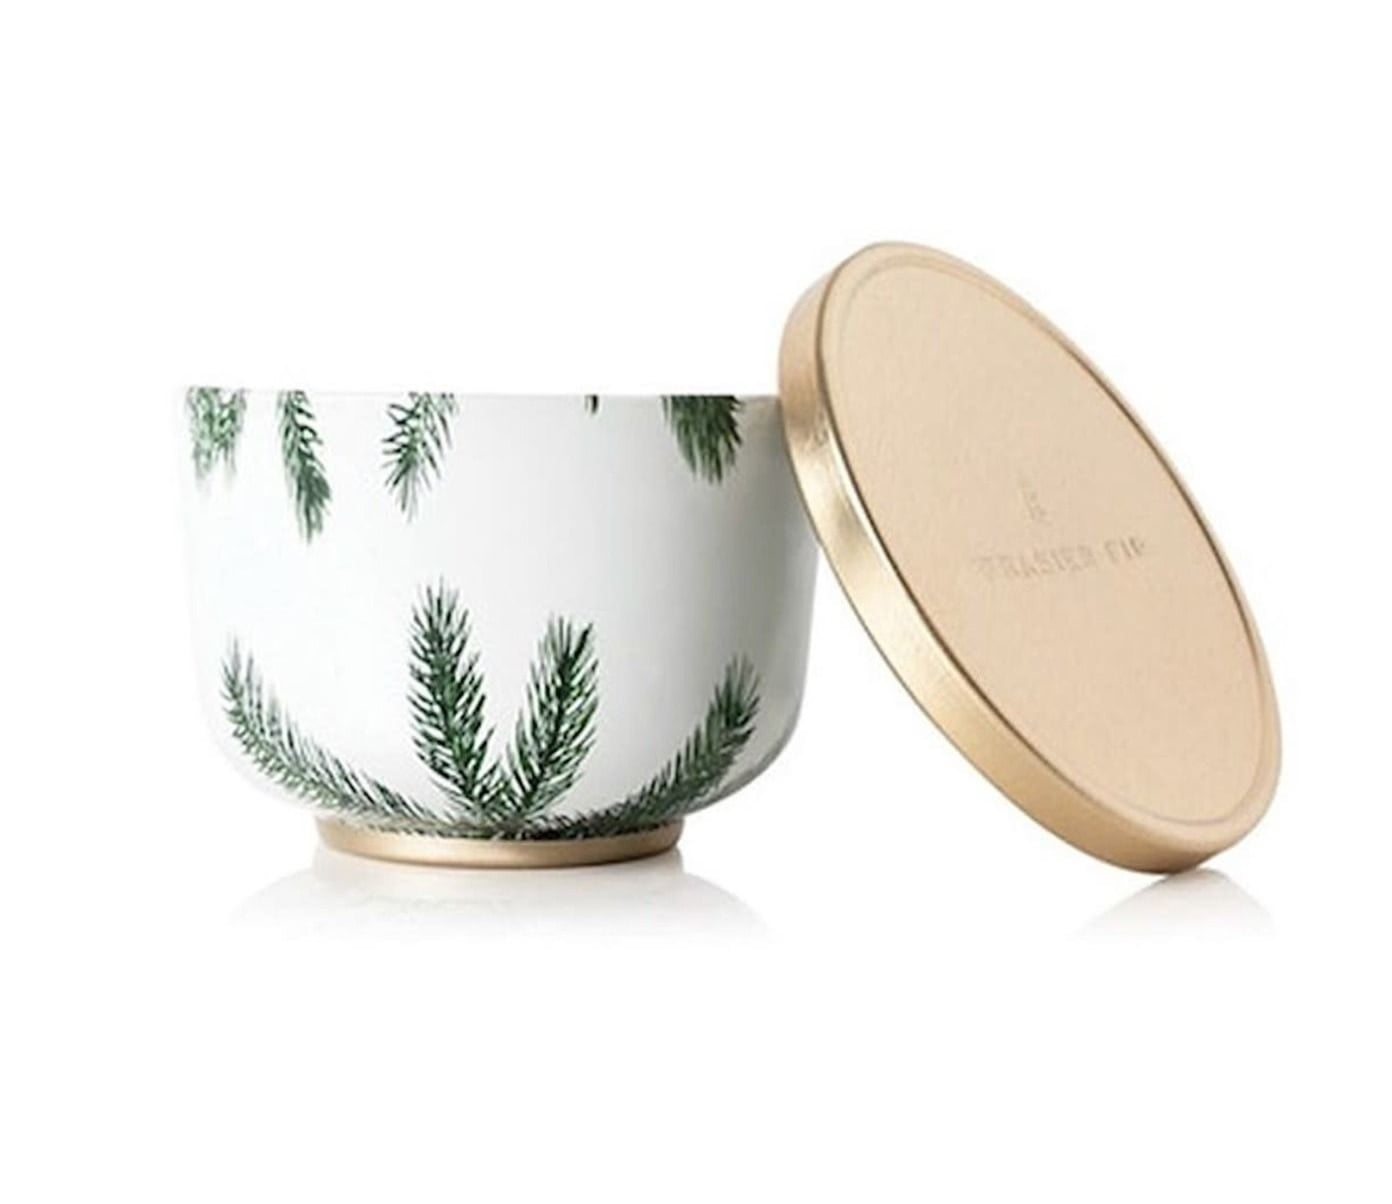 Thymes Pine Needle Frasier Fir Candle 6.5 Oz 